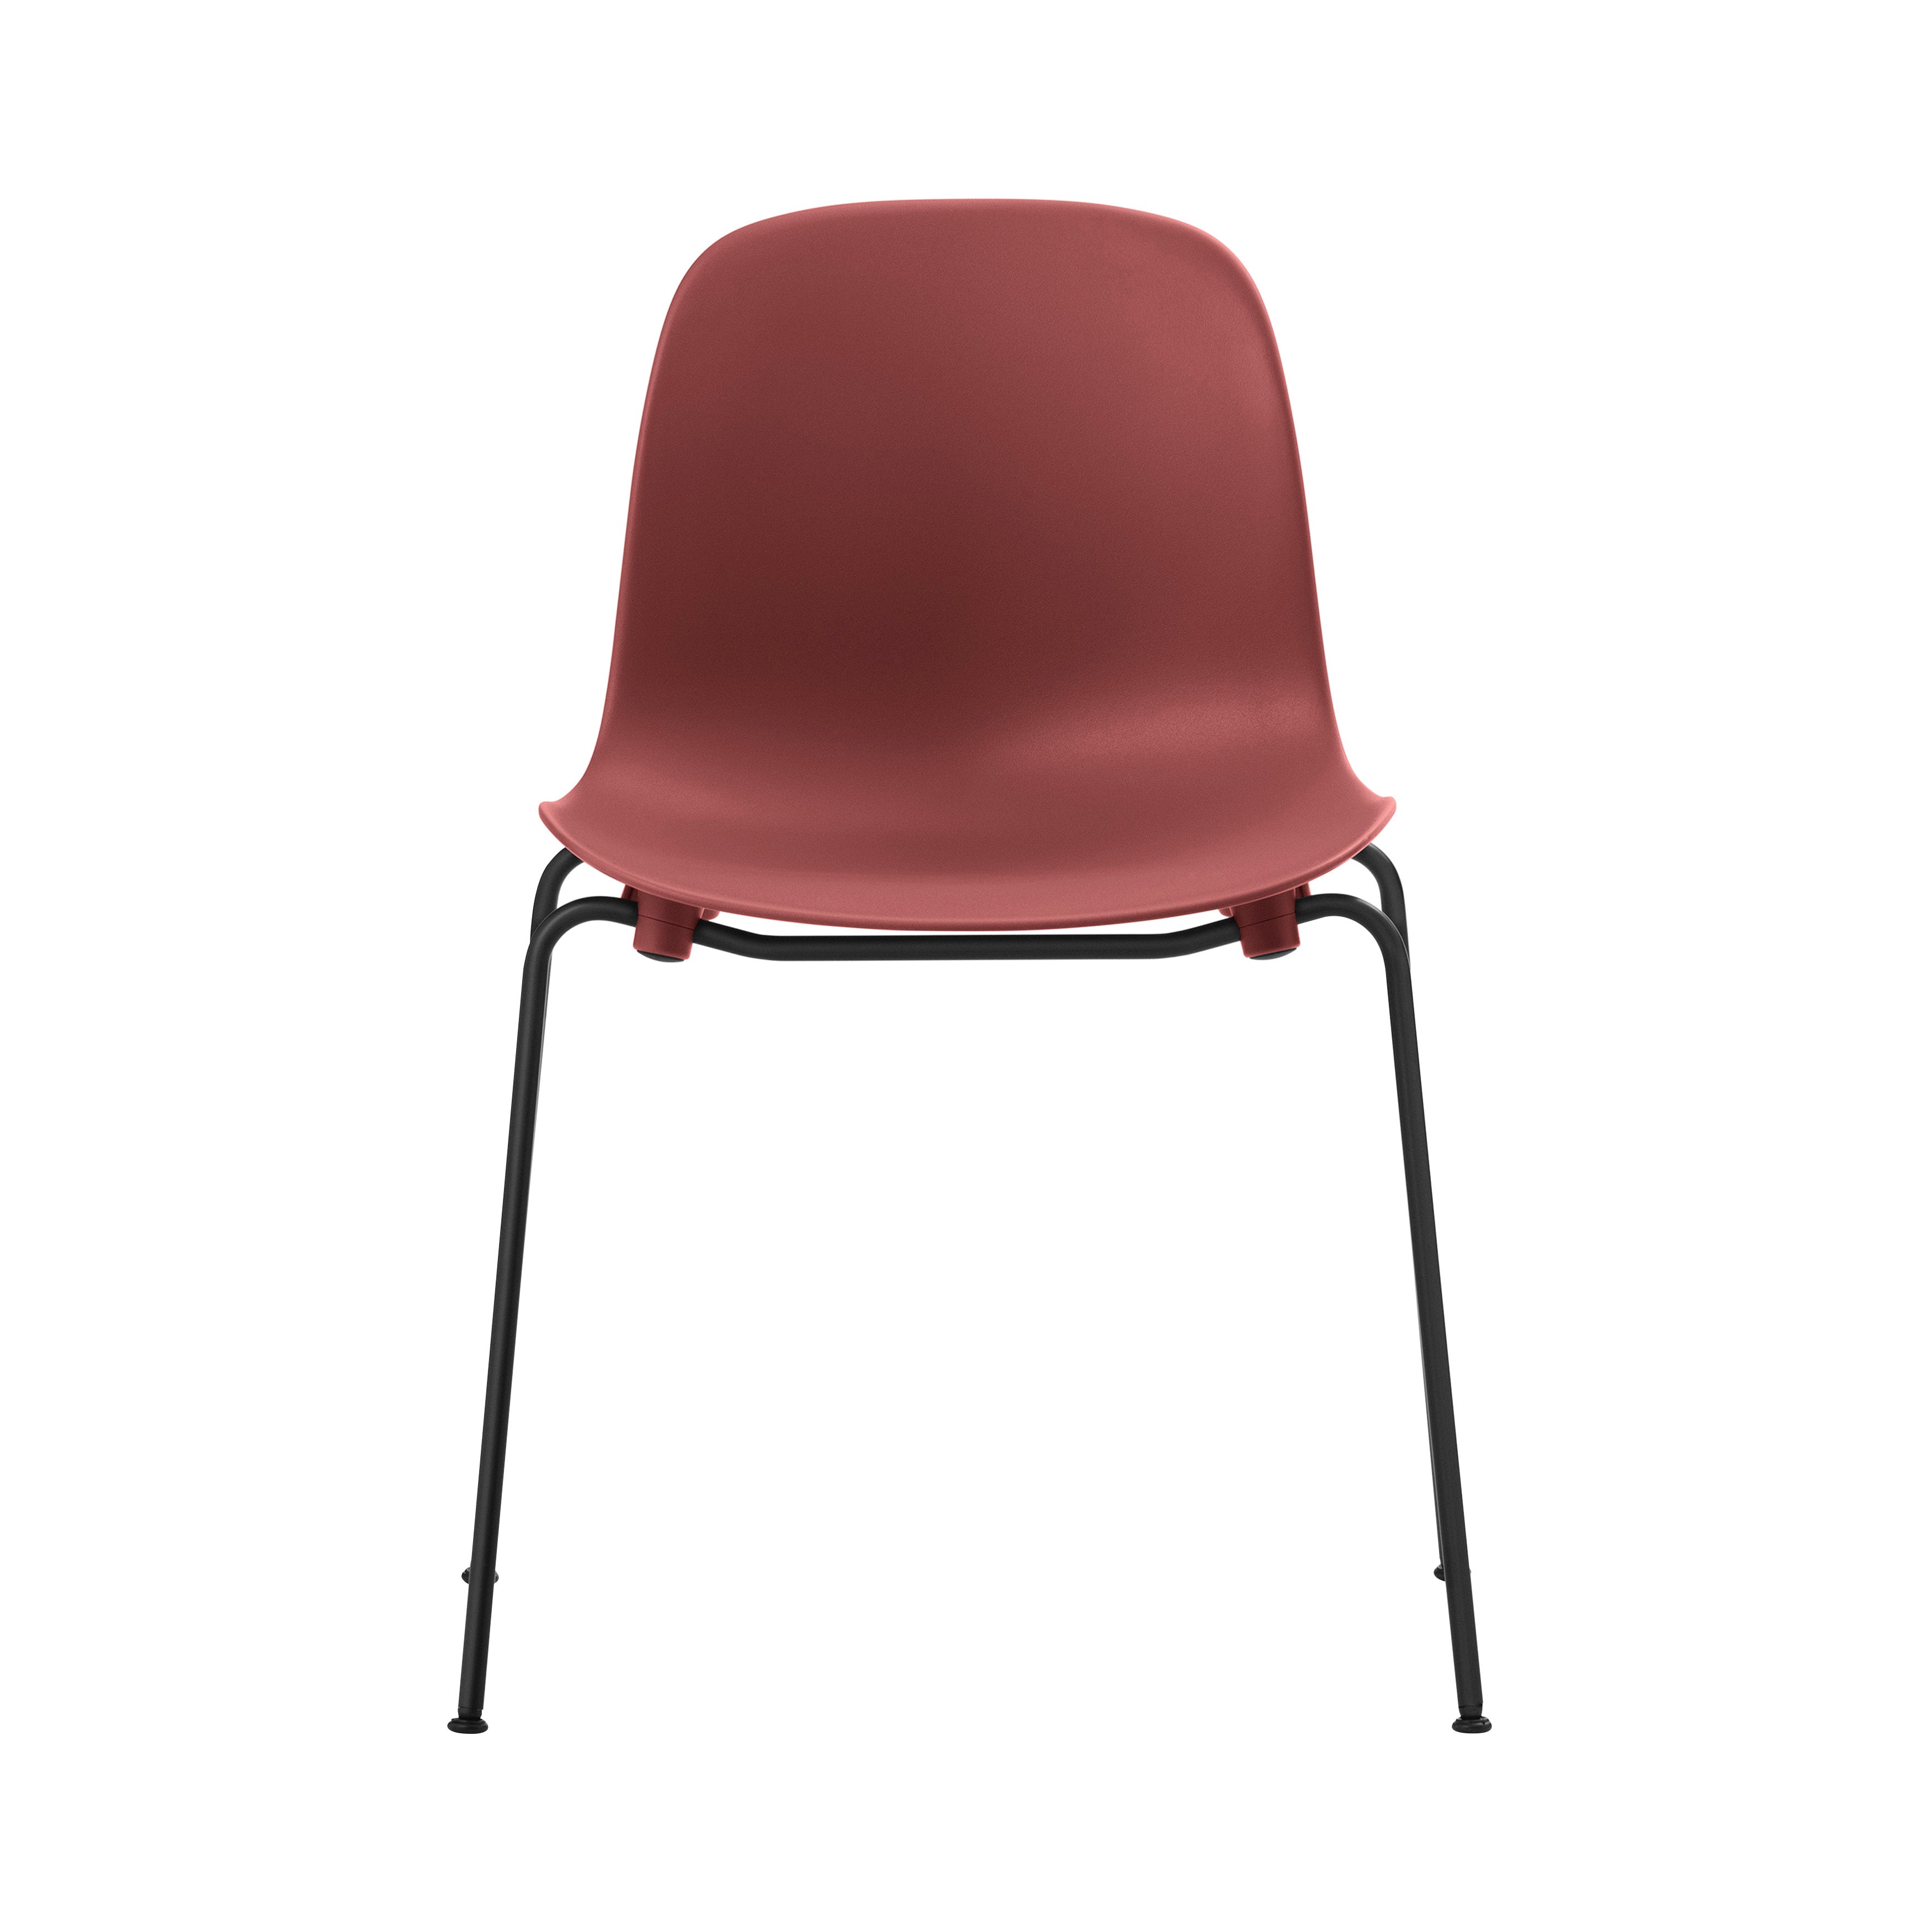 Form Stacking Chair: Steel + Red